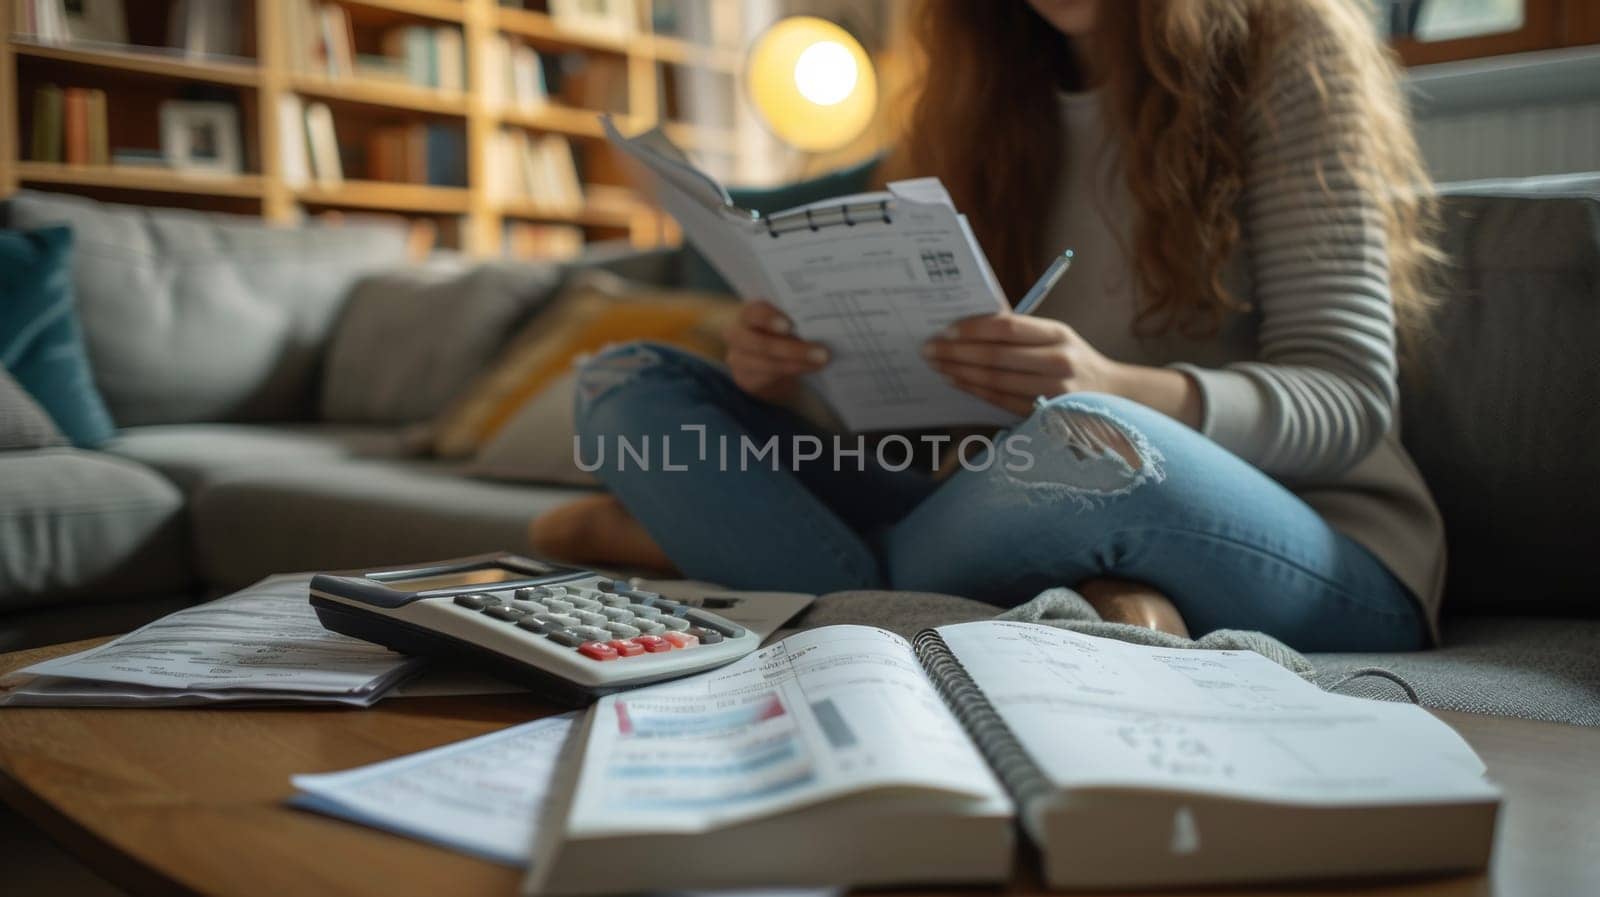 A woman sitting on a couch with books and calculator